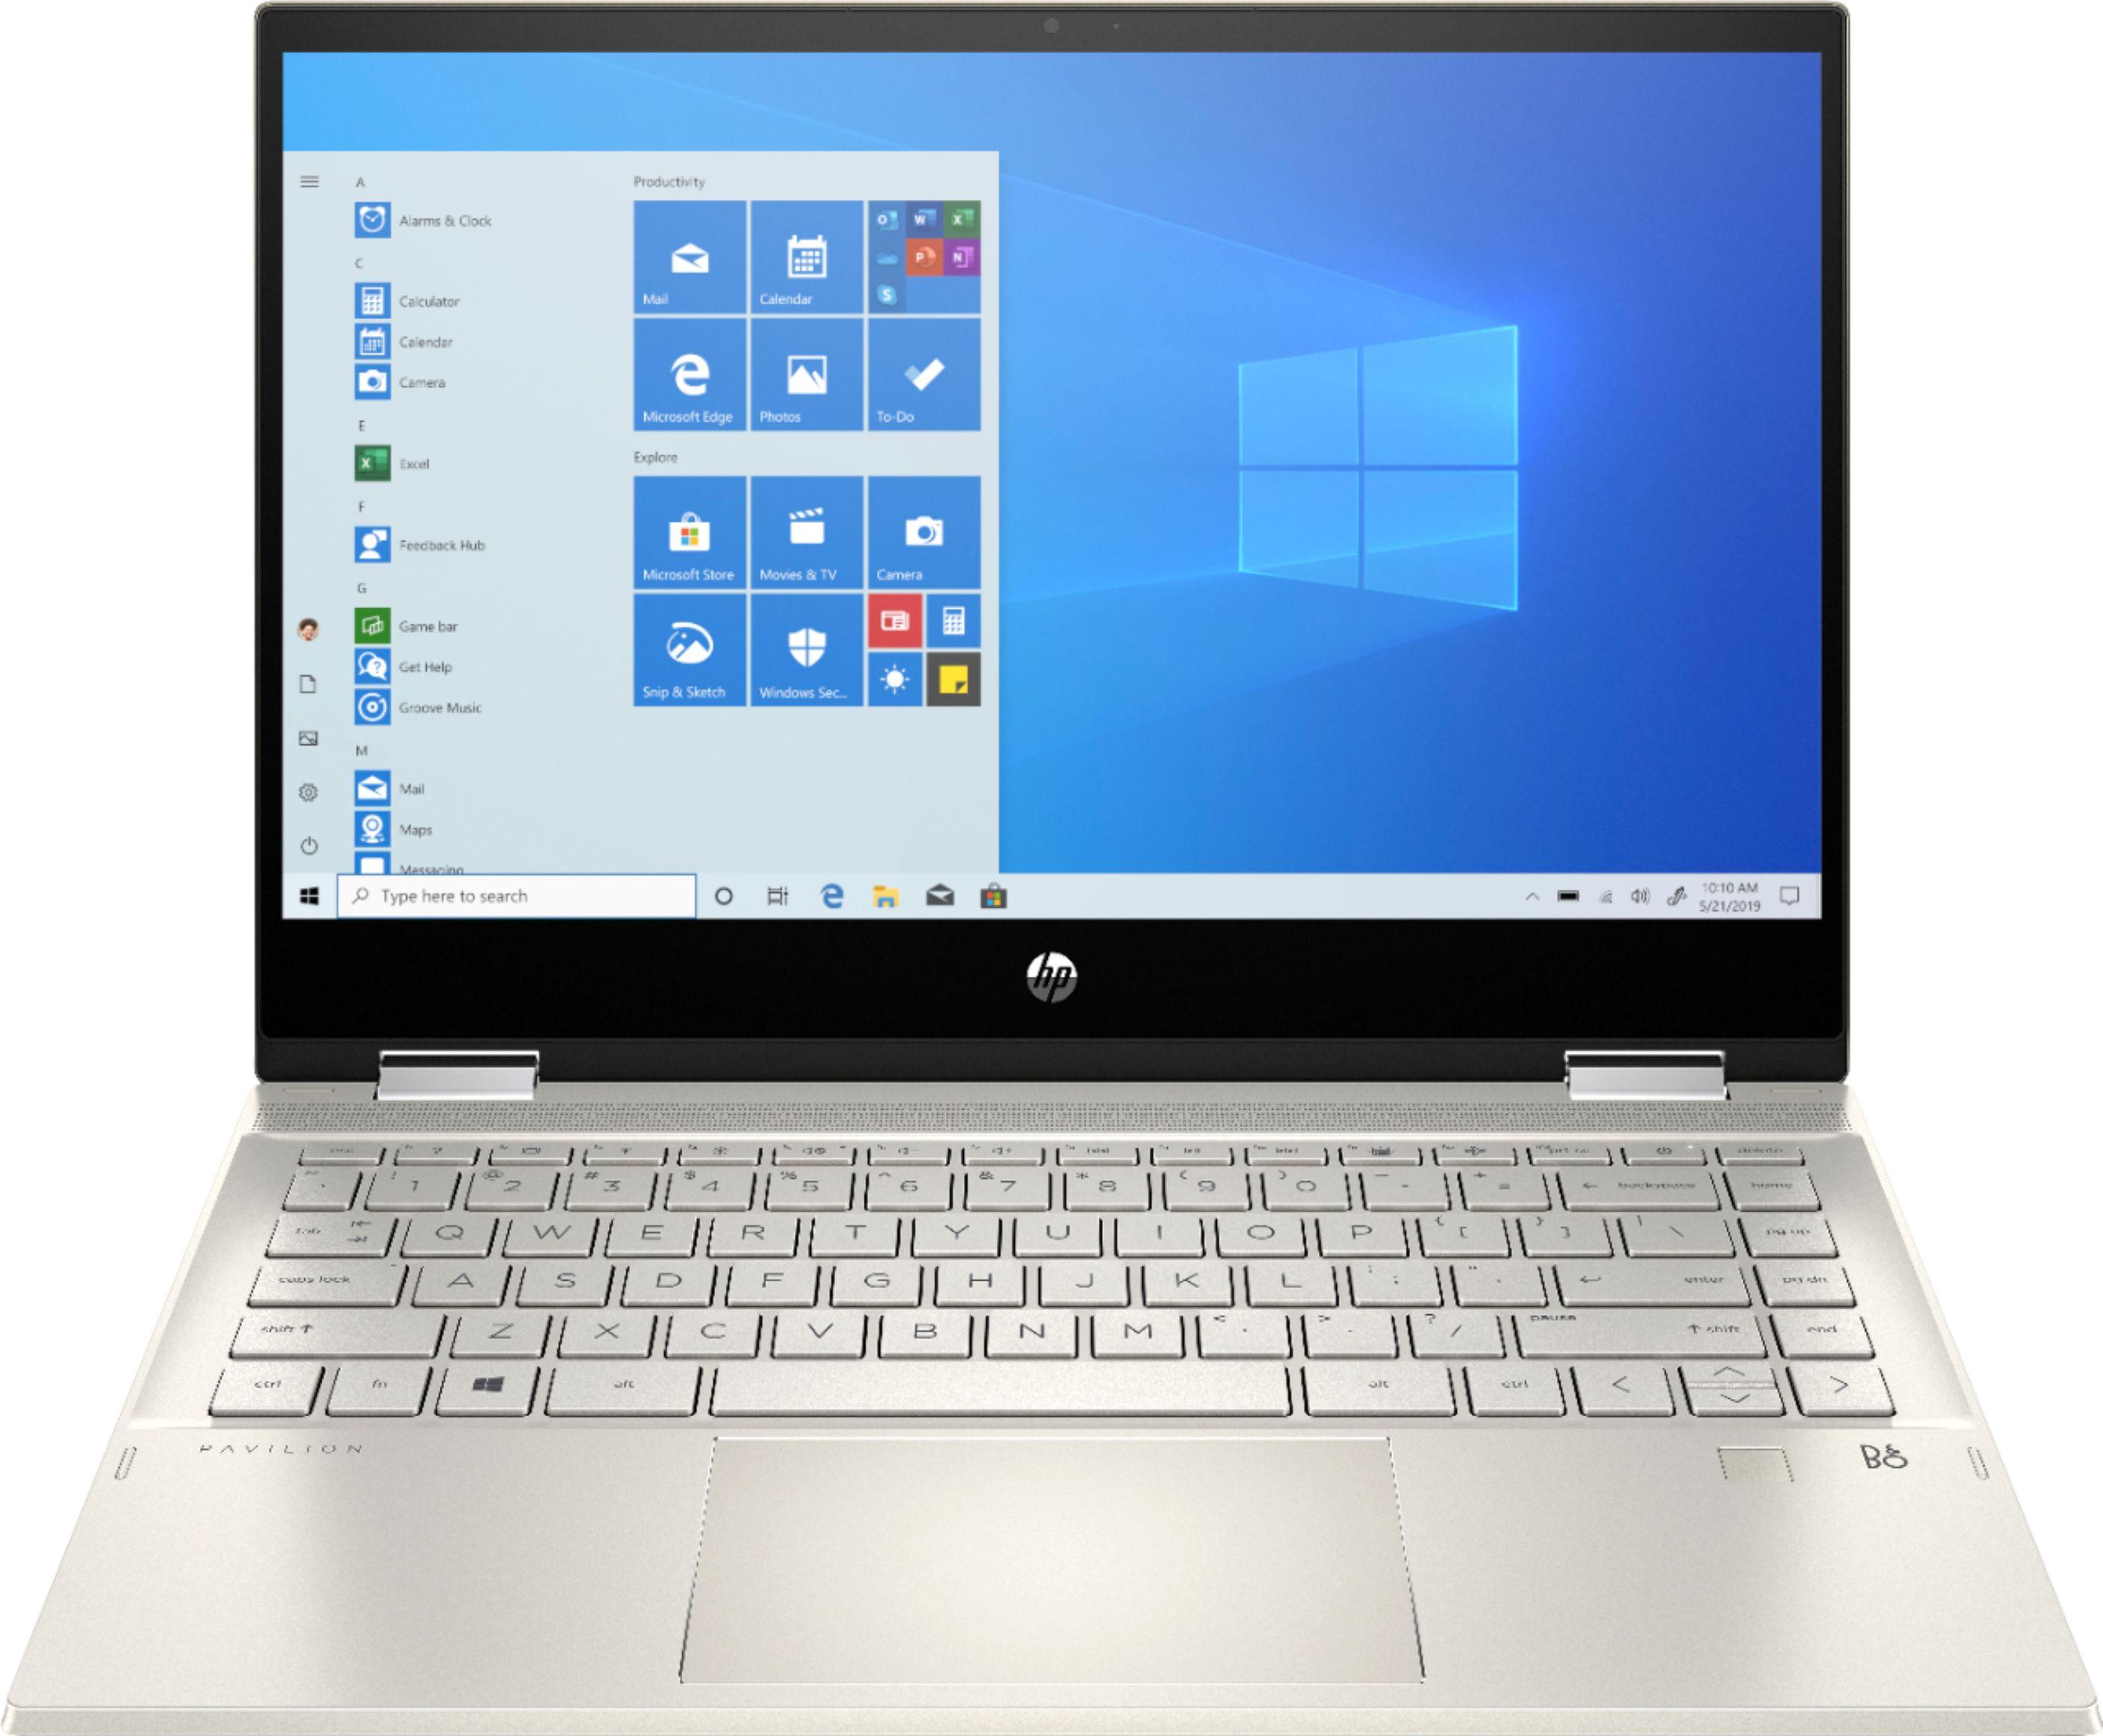 HP Pavilion x360 2-in-1 14in i5 8GB Notebook Laptop for $529.99 Shipped